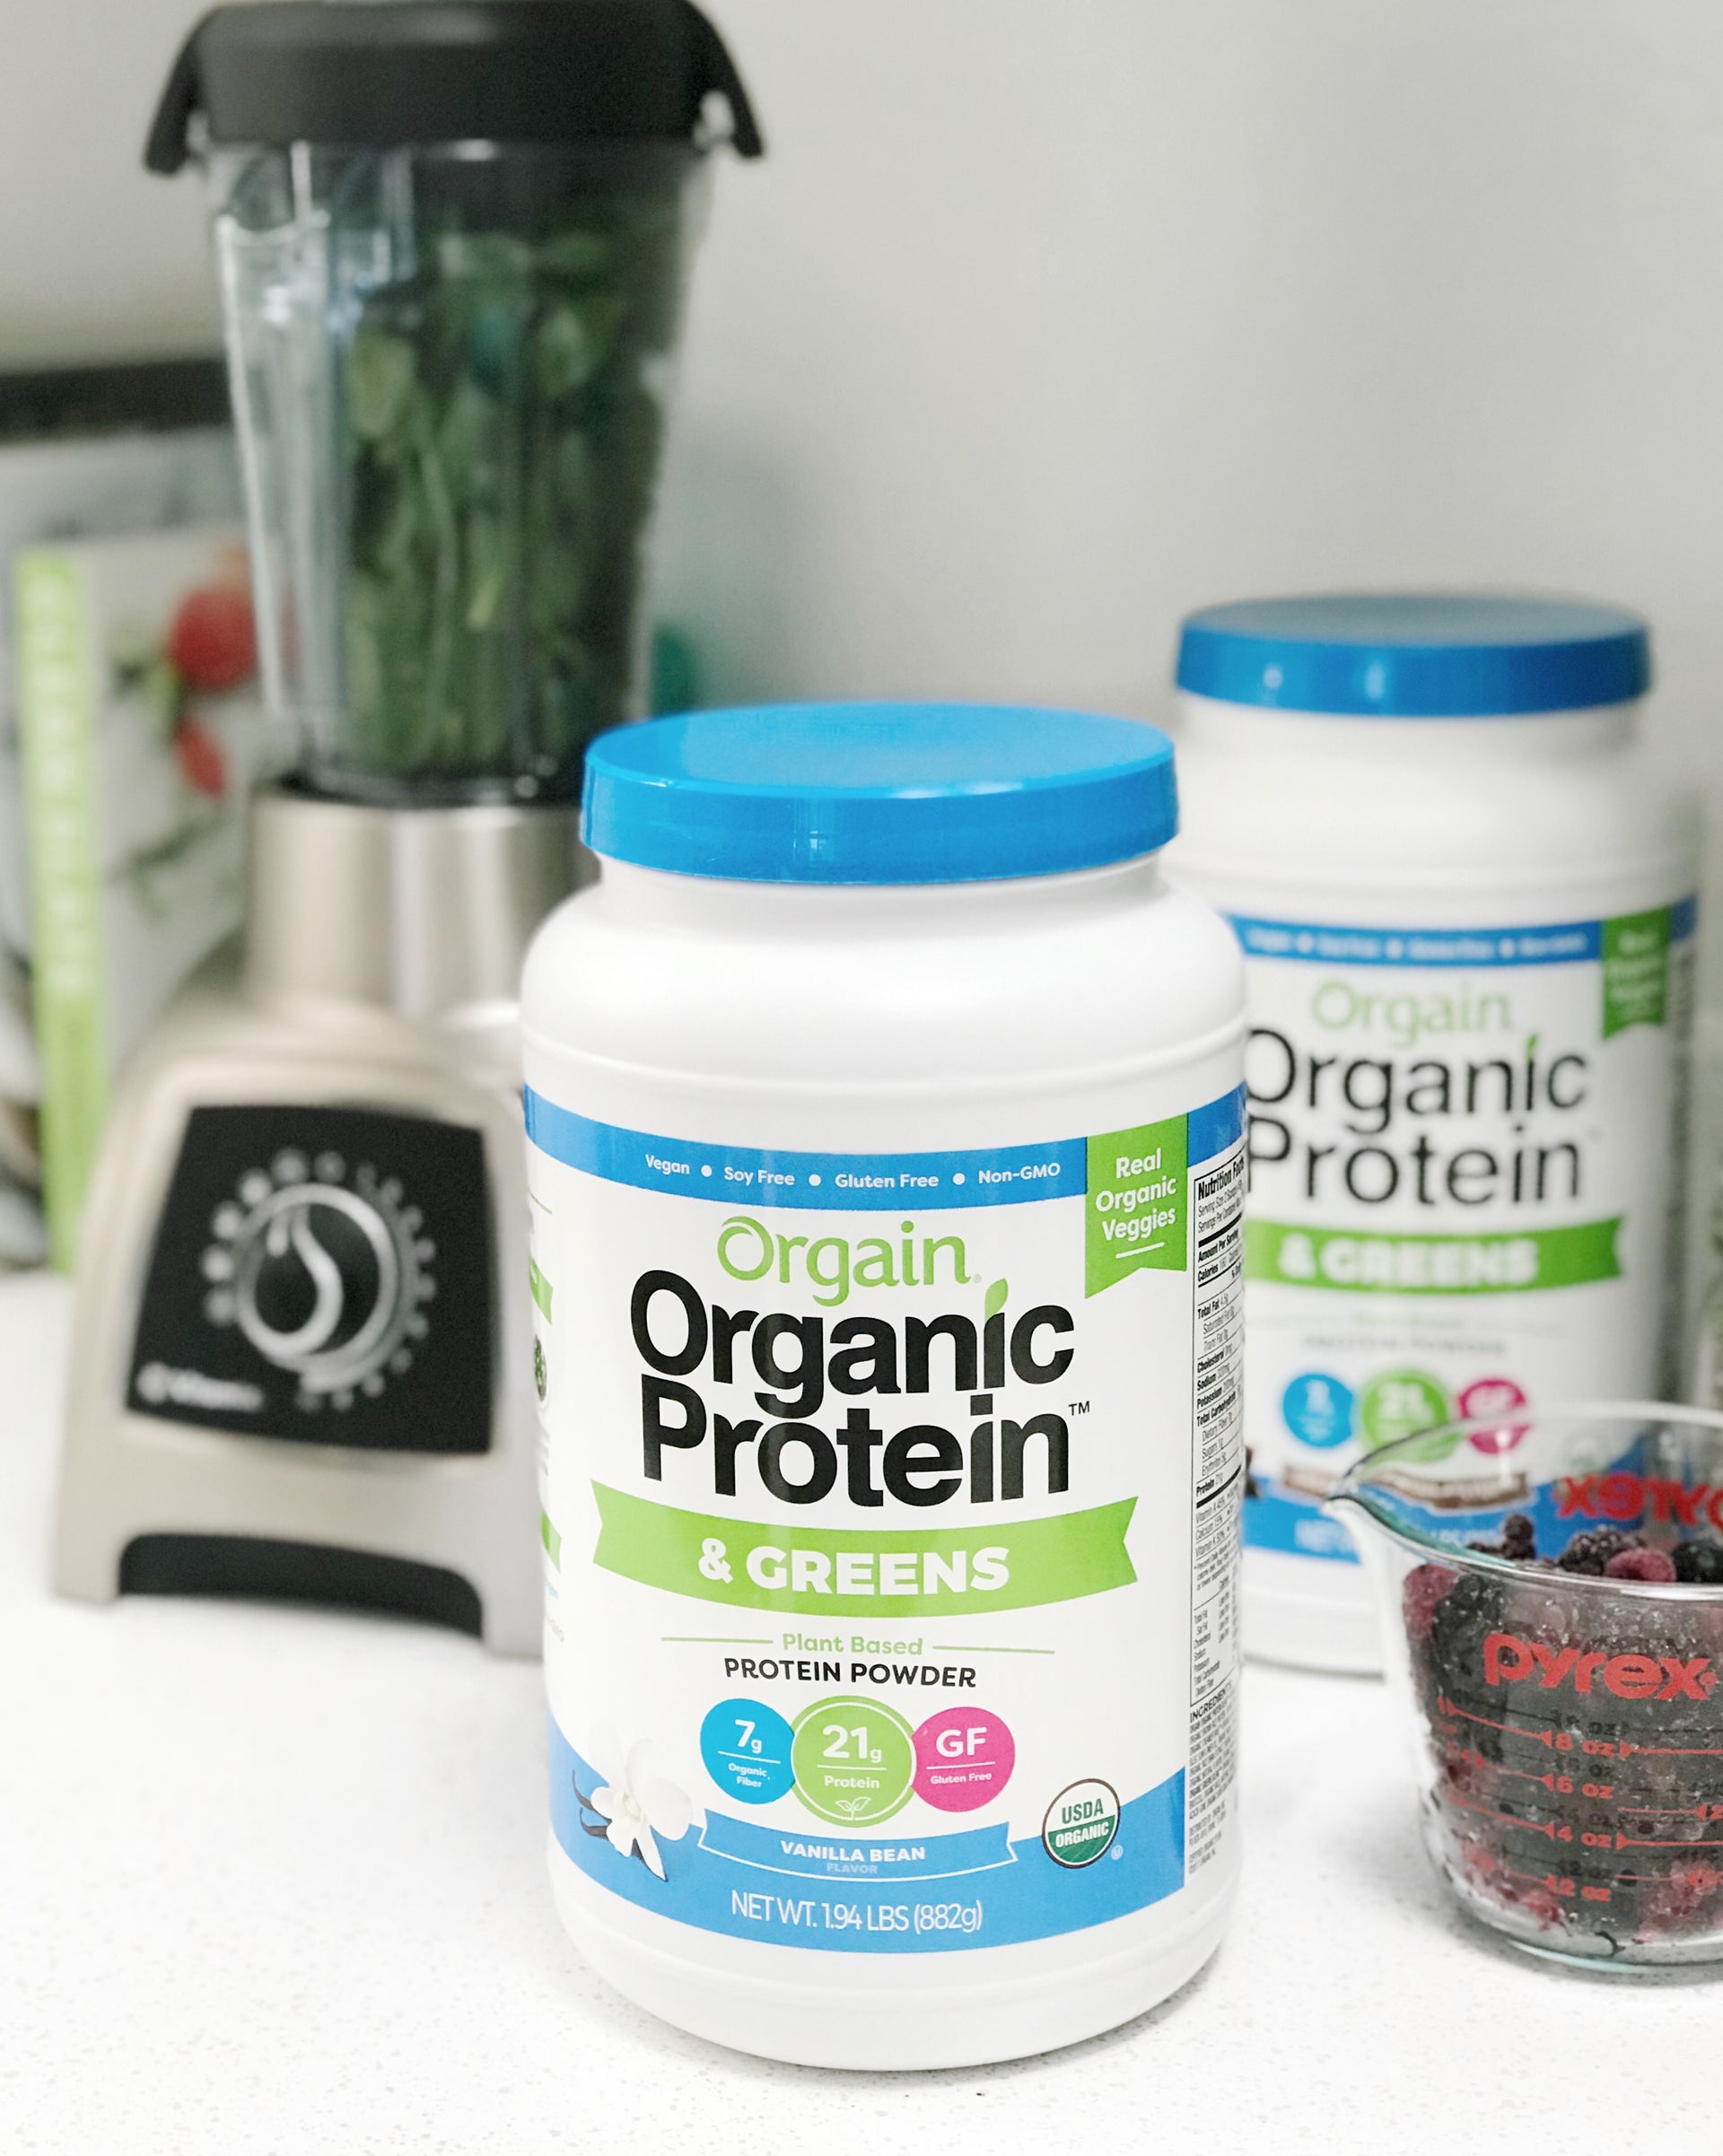 Introducing Orgain Organic Protein & Greens Plant Based Protein Powder